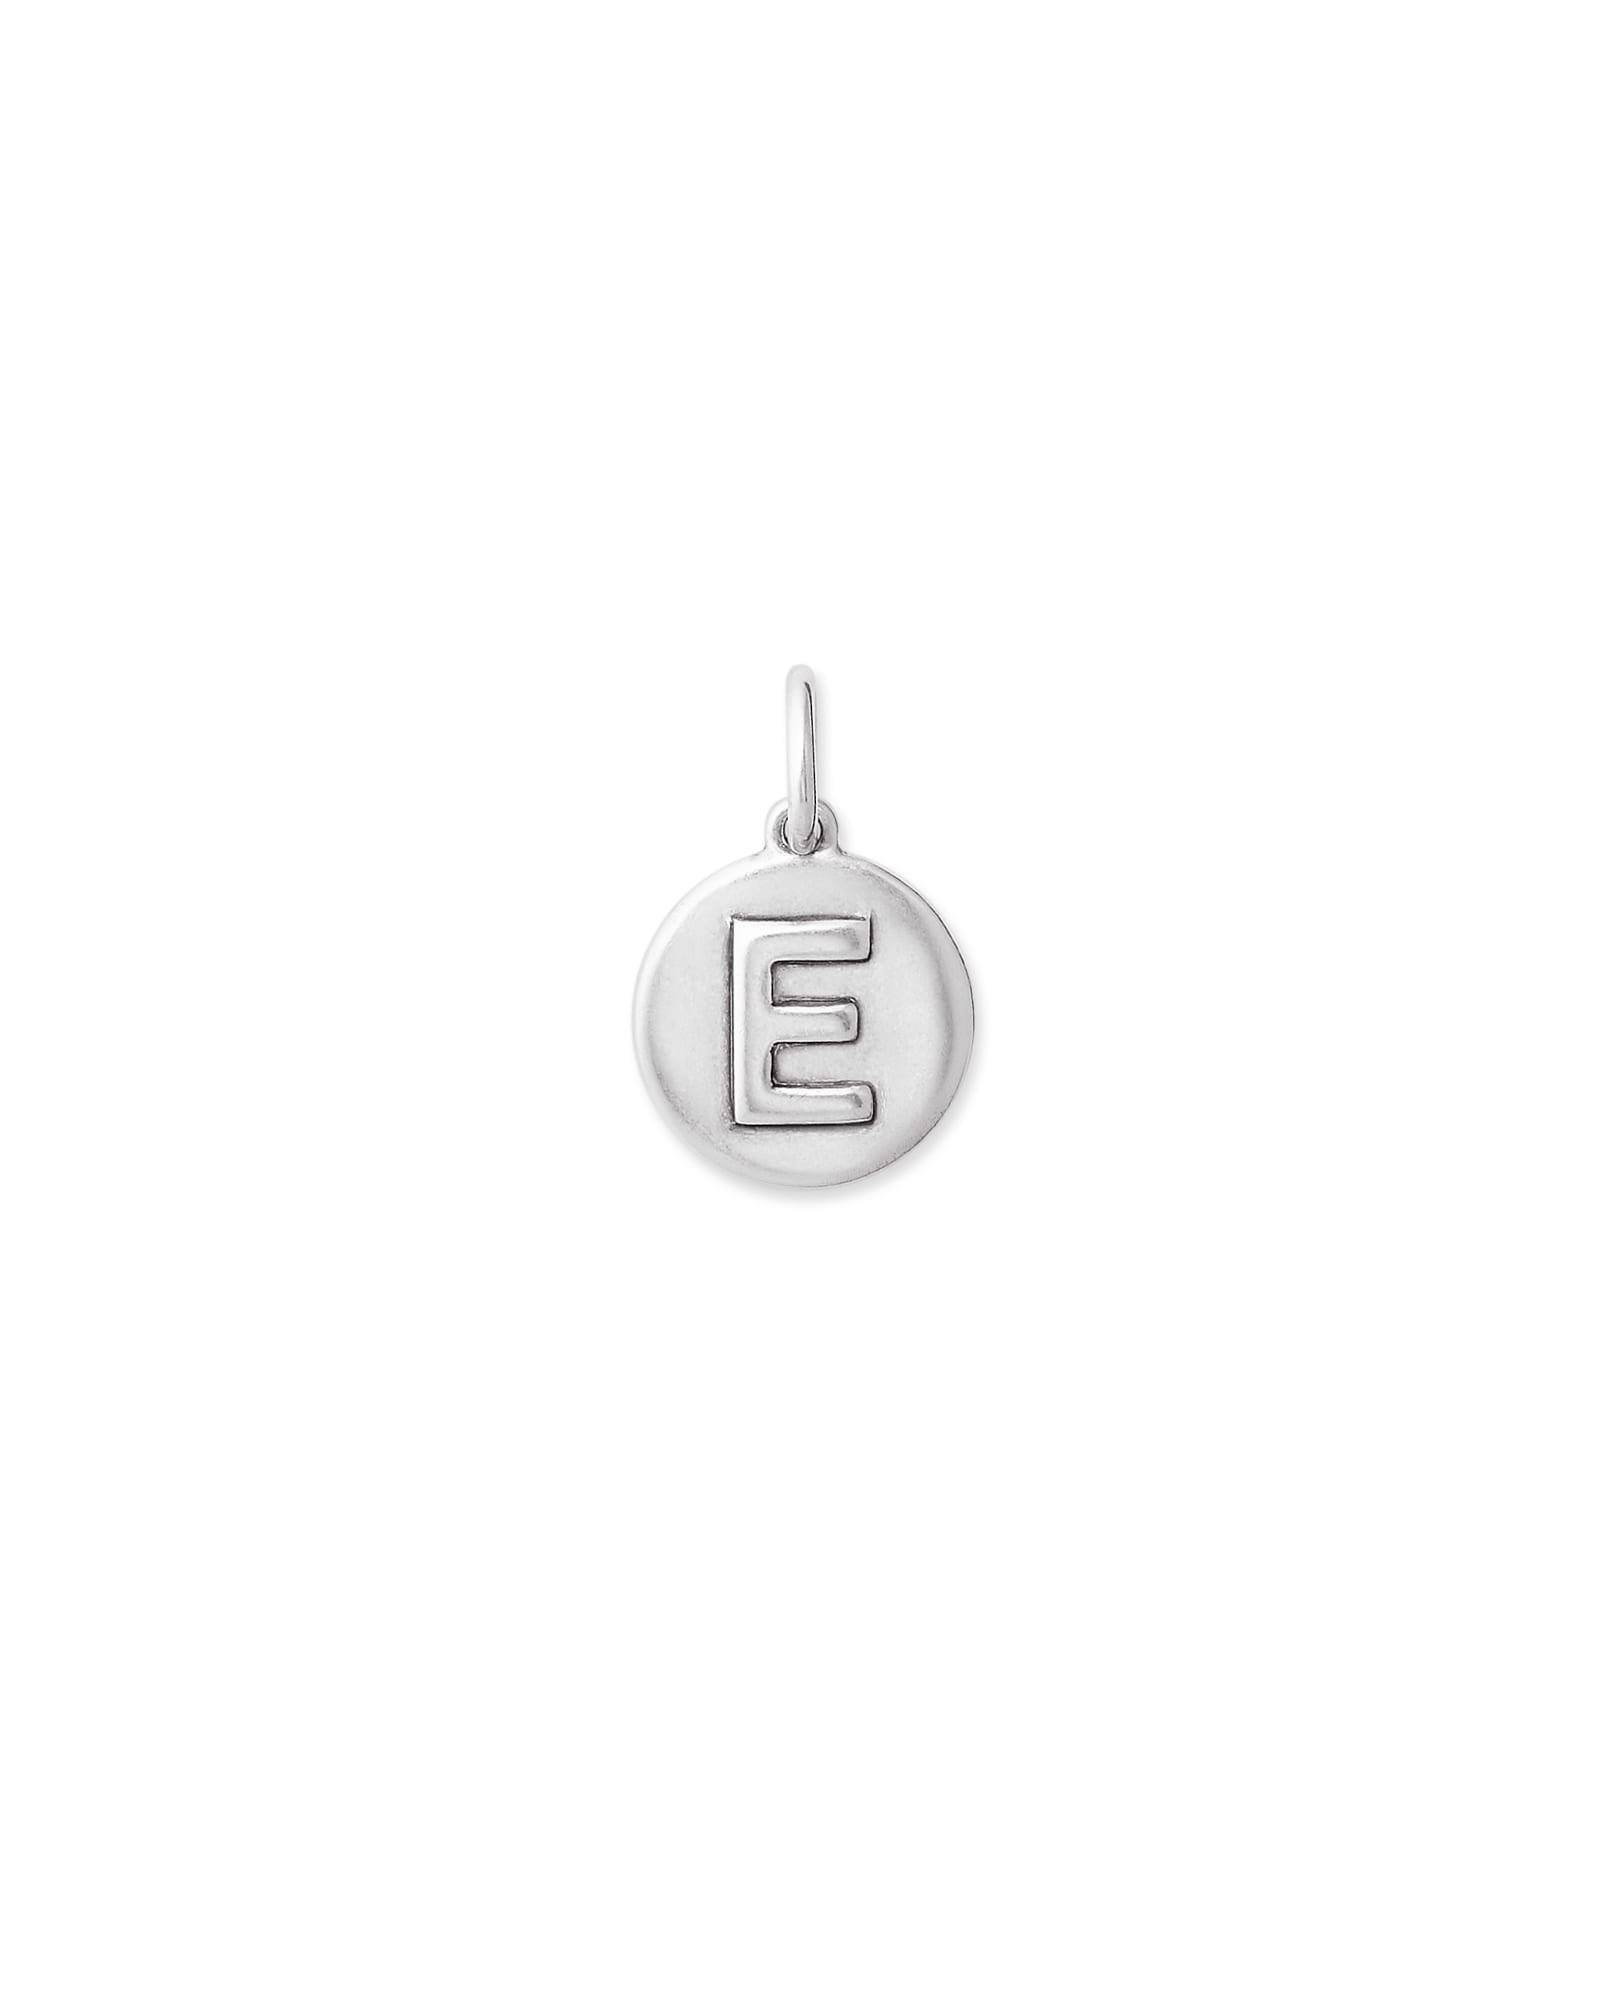 Kendra Scott Letter E Coin Charm in Oxidized Sterling Silver   Metal